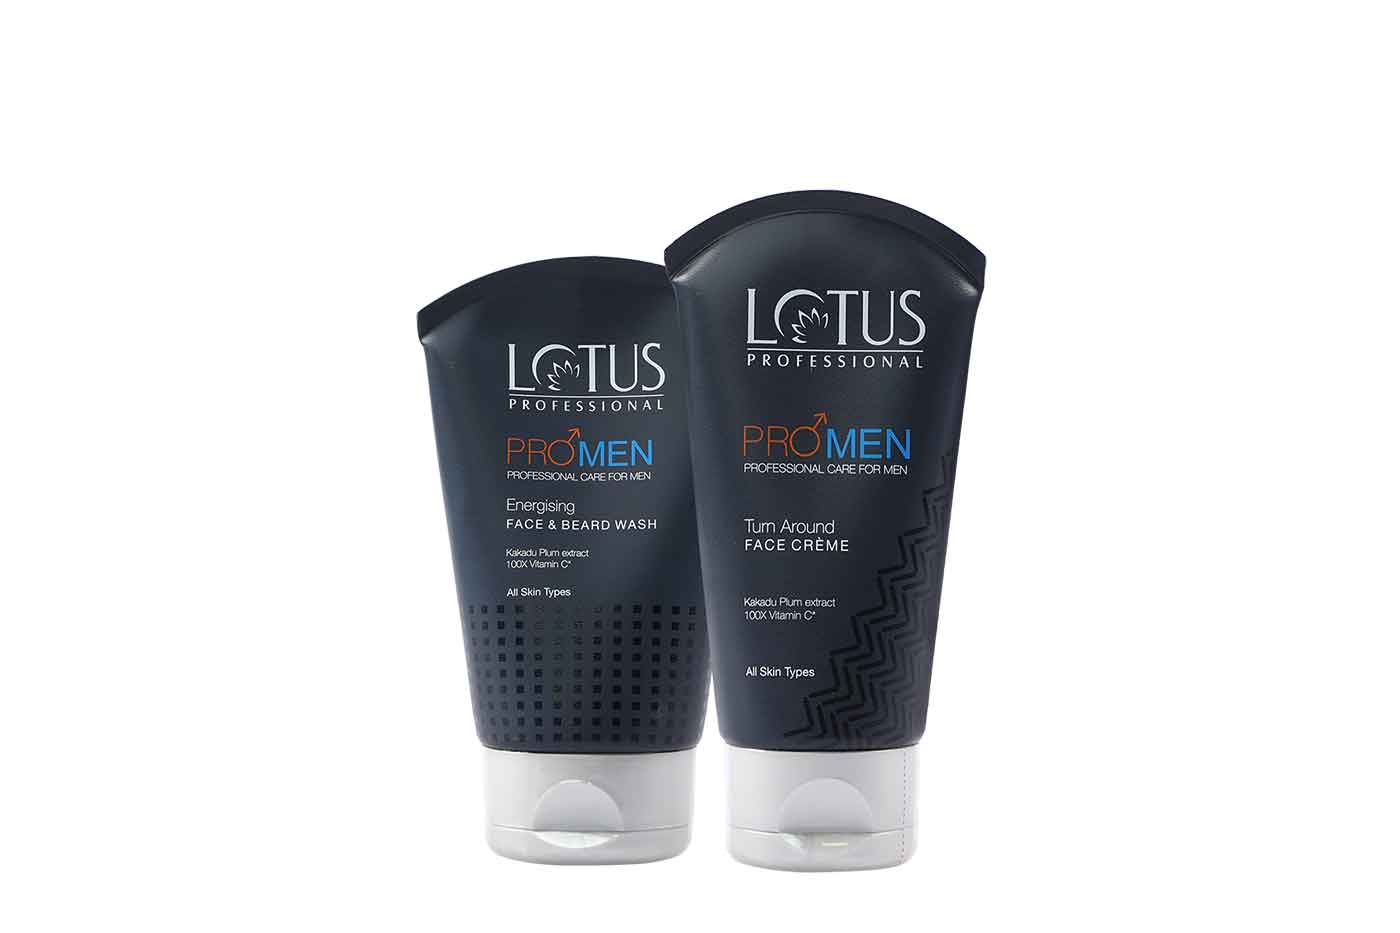 Lotus Herbals expands men’s facial products with target-based remedial offerings